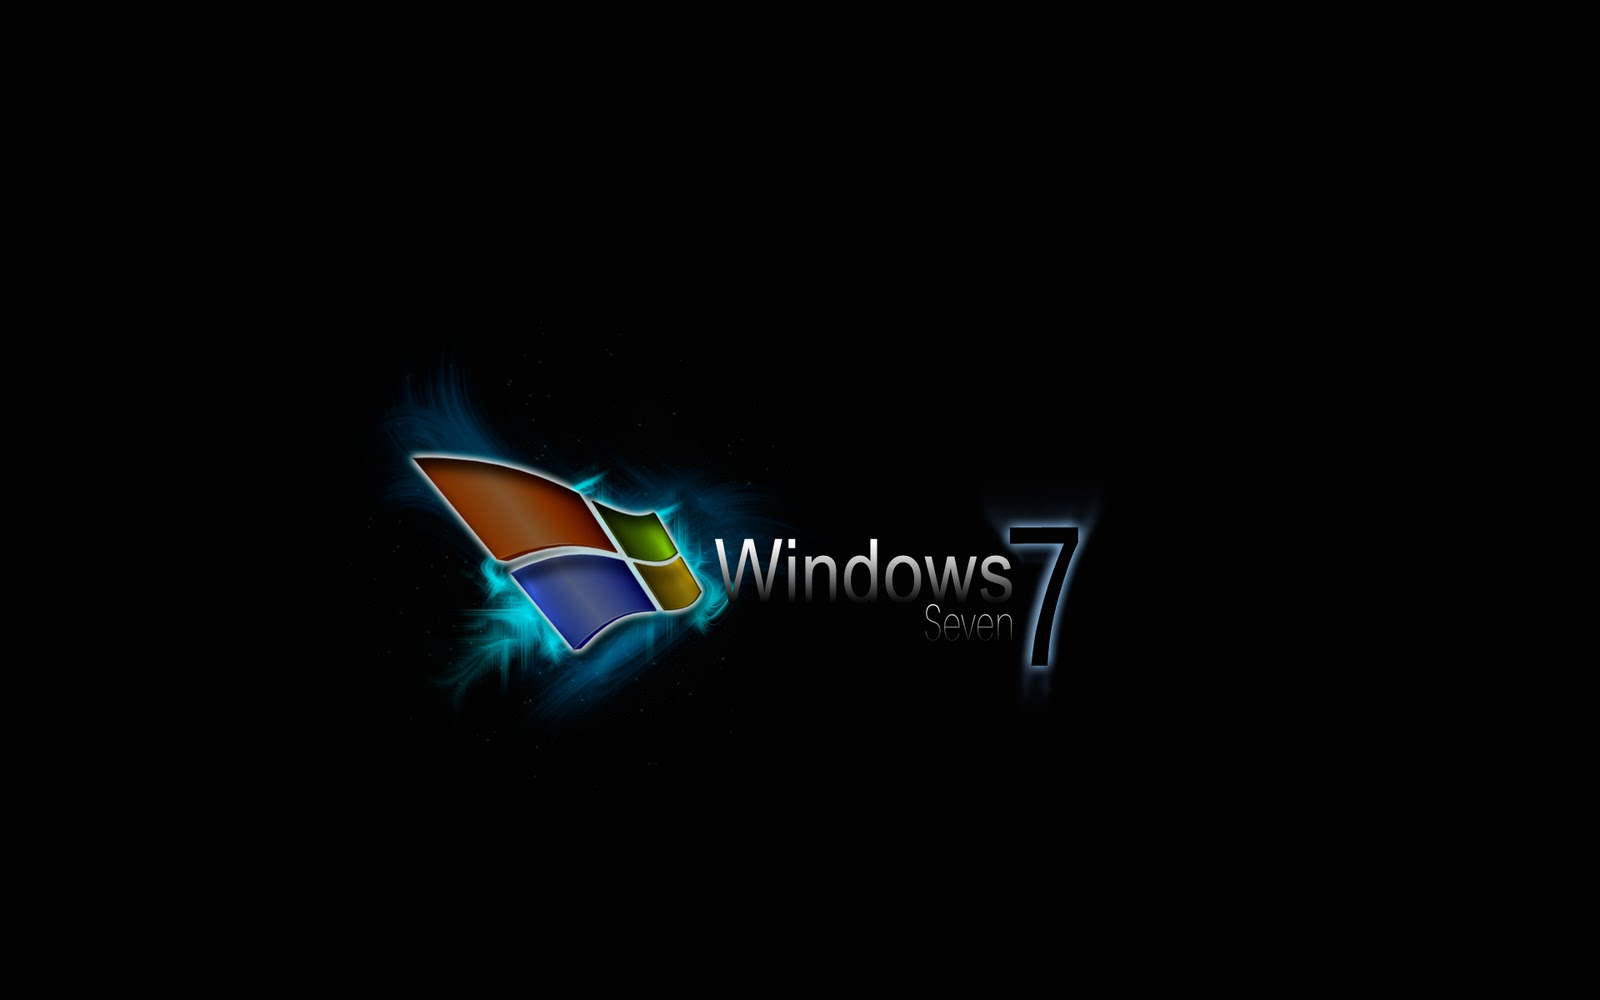 windows 7 themes free download for windows 7 ultimate 32 bit Torrent.